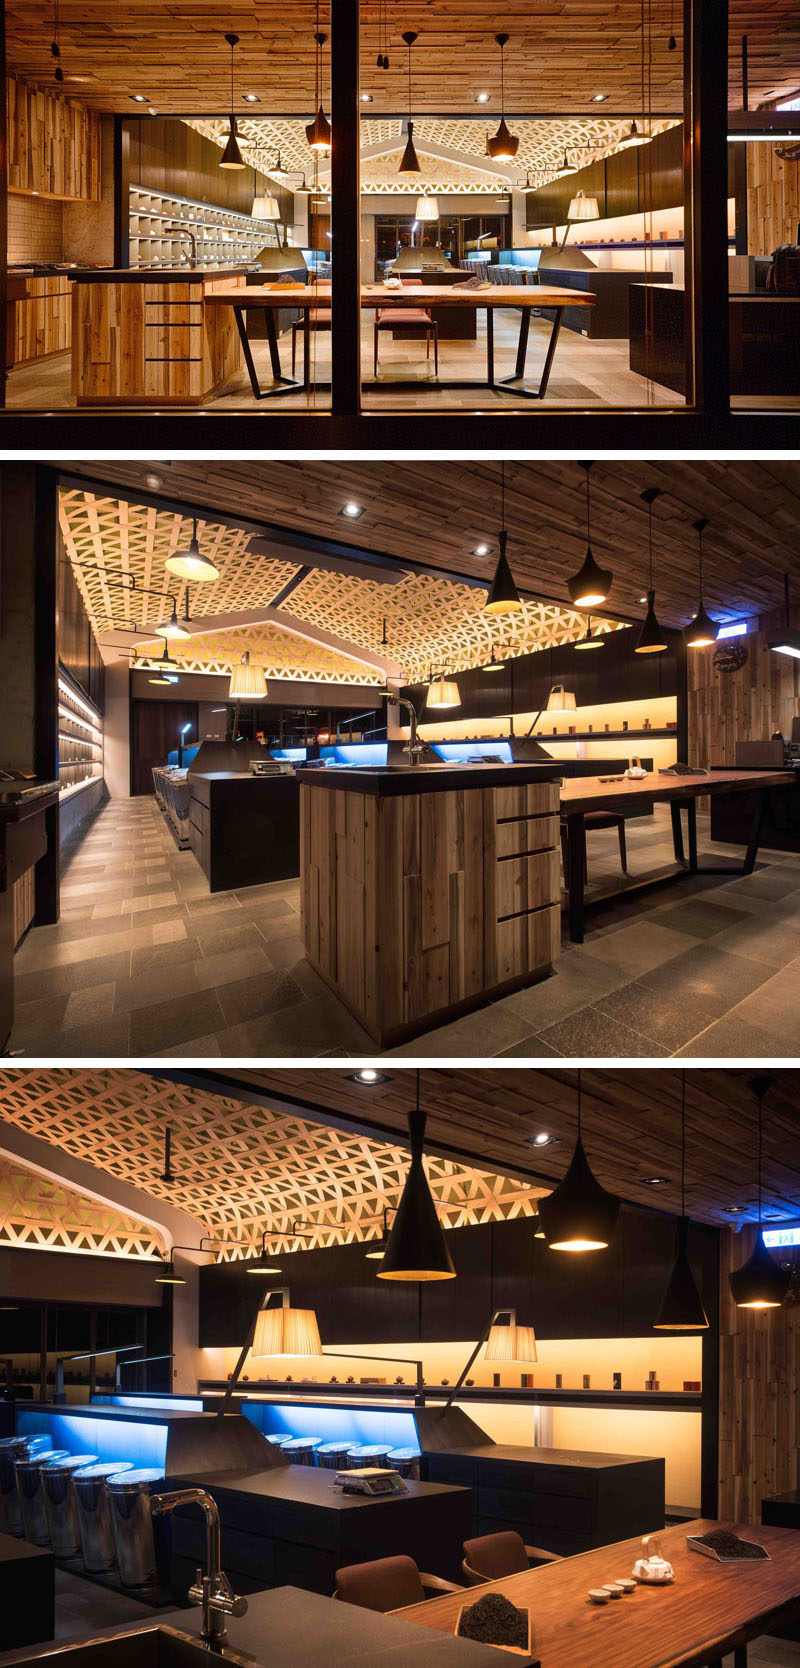 Ceiling Design Ideas - A Woven Wood Drop Ceiling Creates A Dramatic Cathedral Effect In This Tea Shop